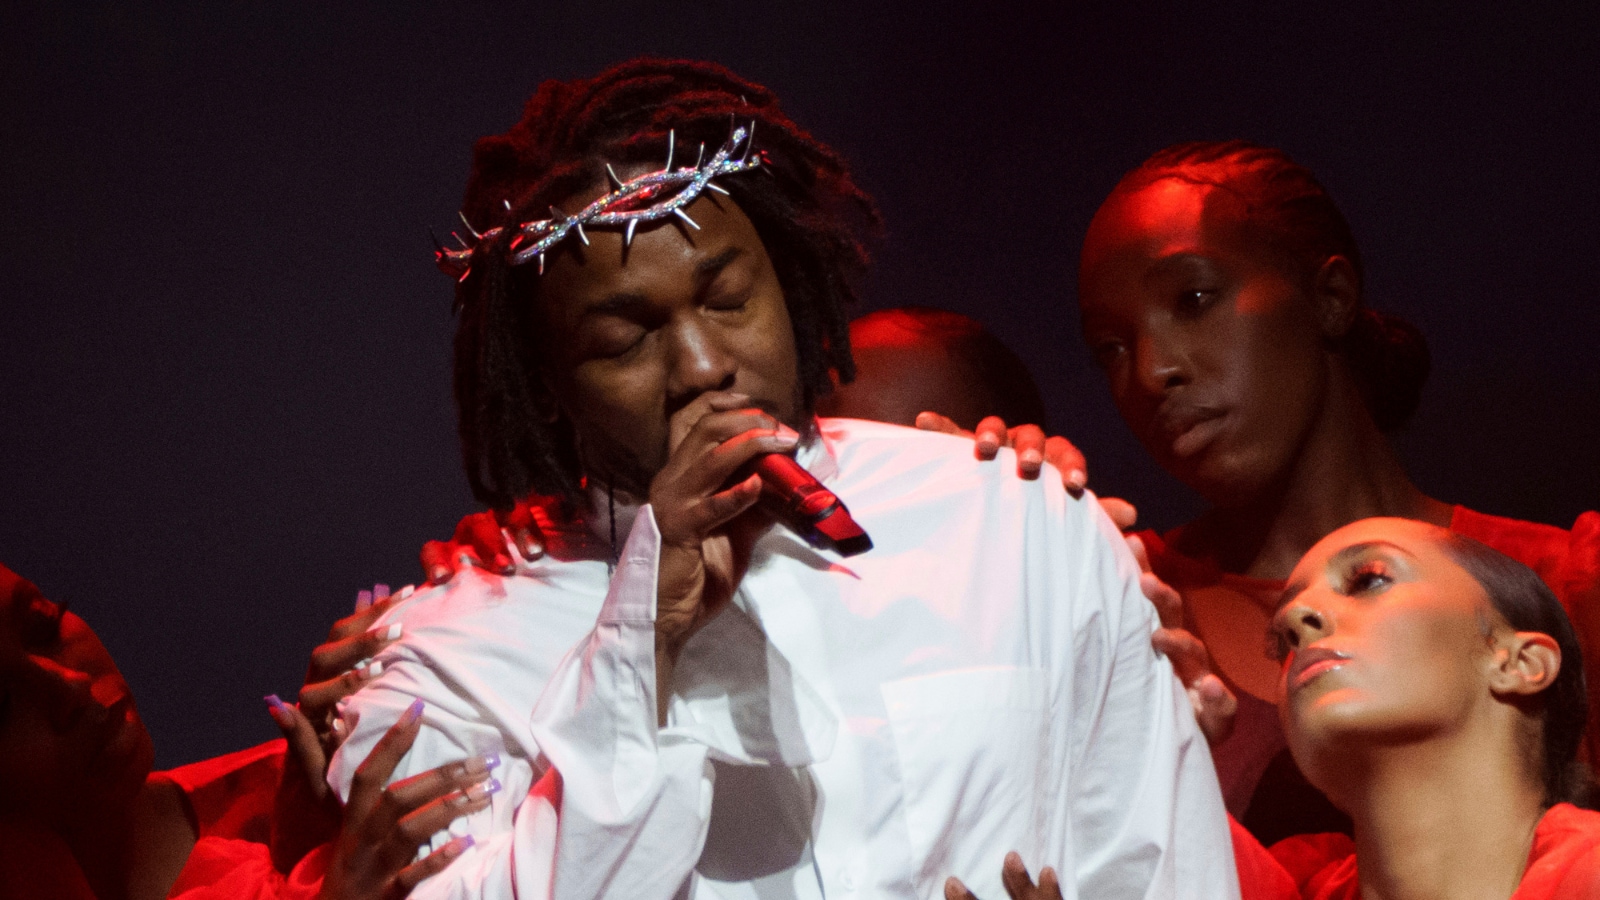 Kendrick Lamar Laments Loss of Women's Rights Wearing Crown of Thorns